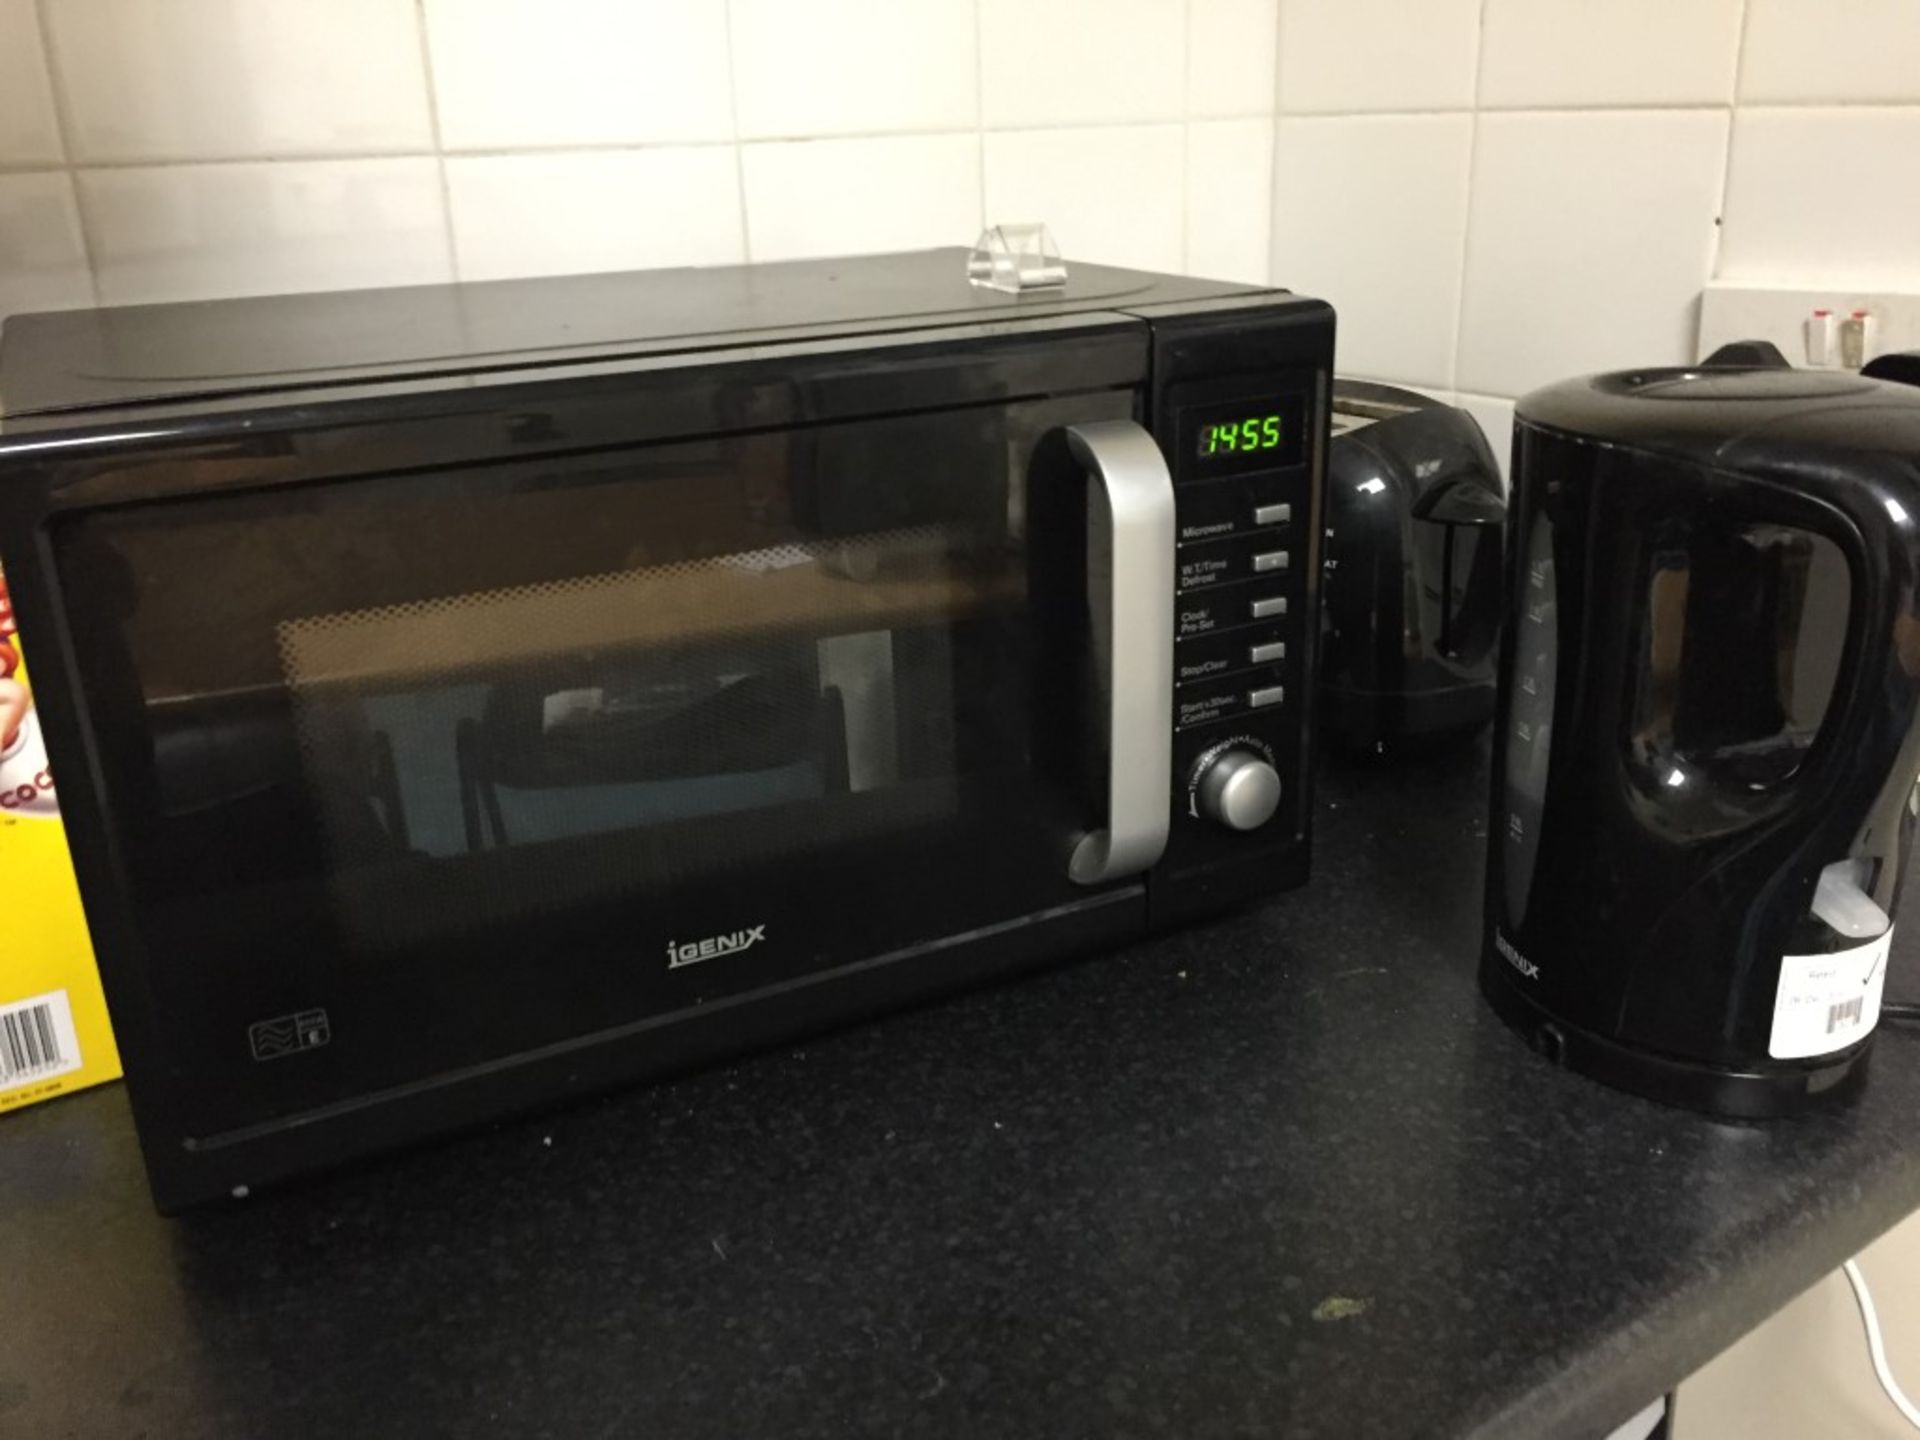 Job Lot of Staff Canteen Contents Including Sofa And Appliances - Ref: CF022 - CL127 - Location: